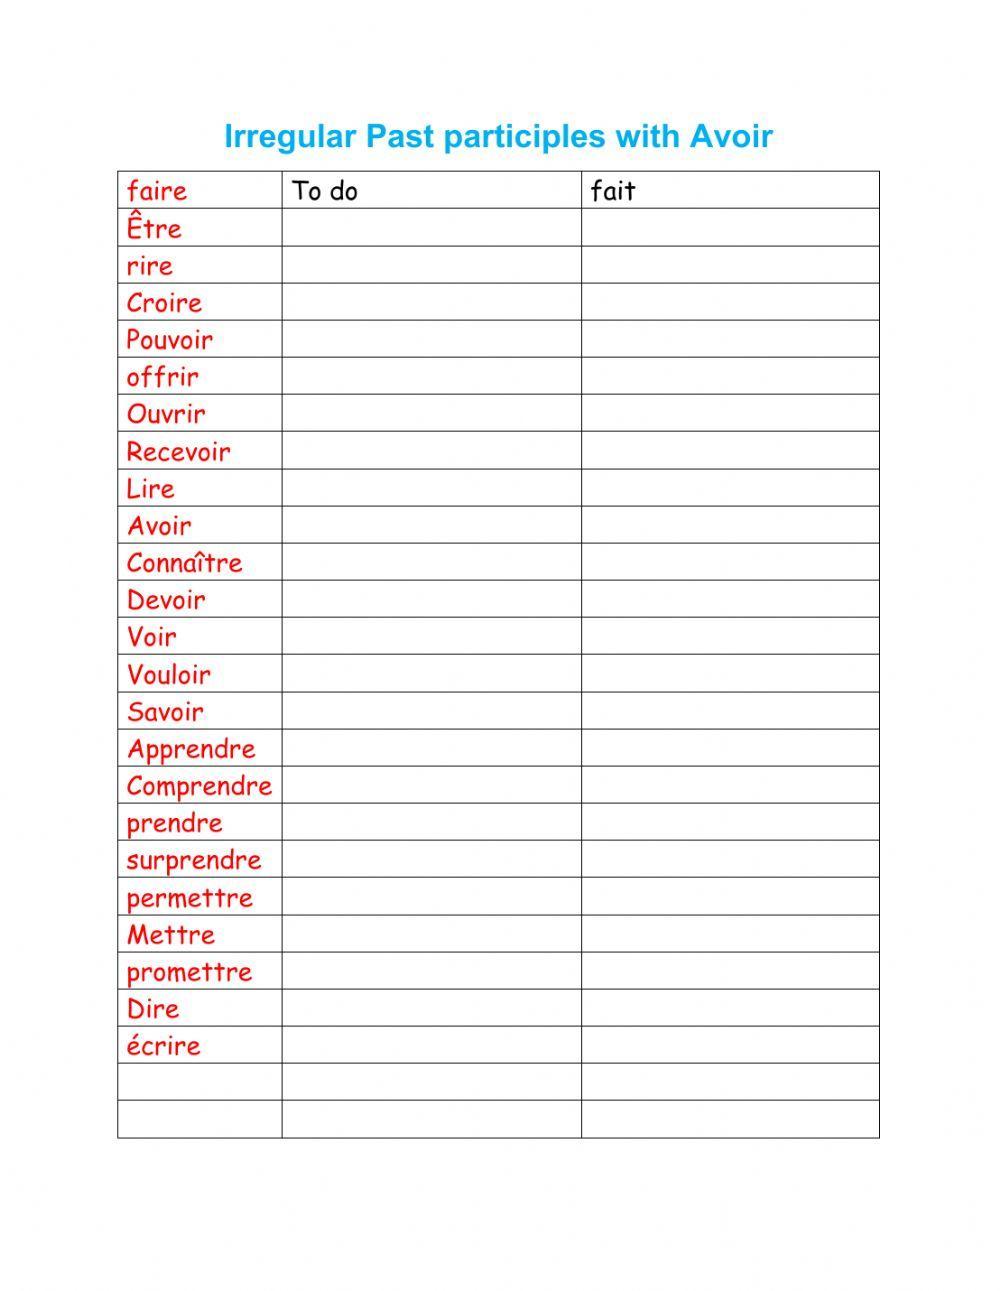 Irregular past participles with avoir